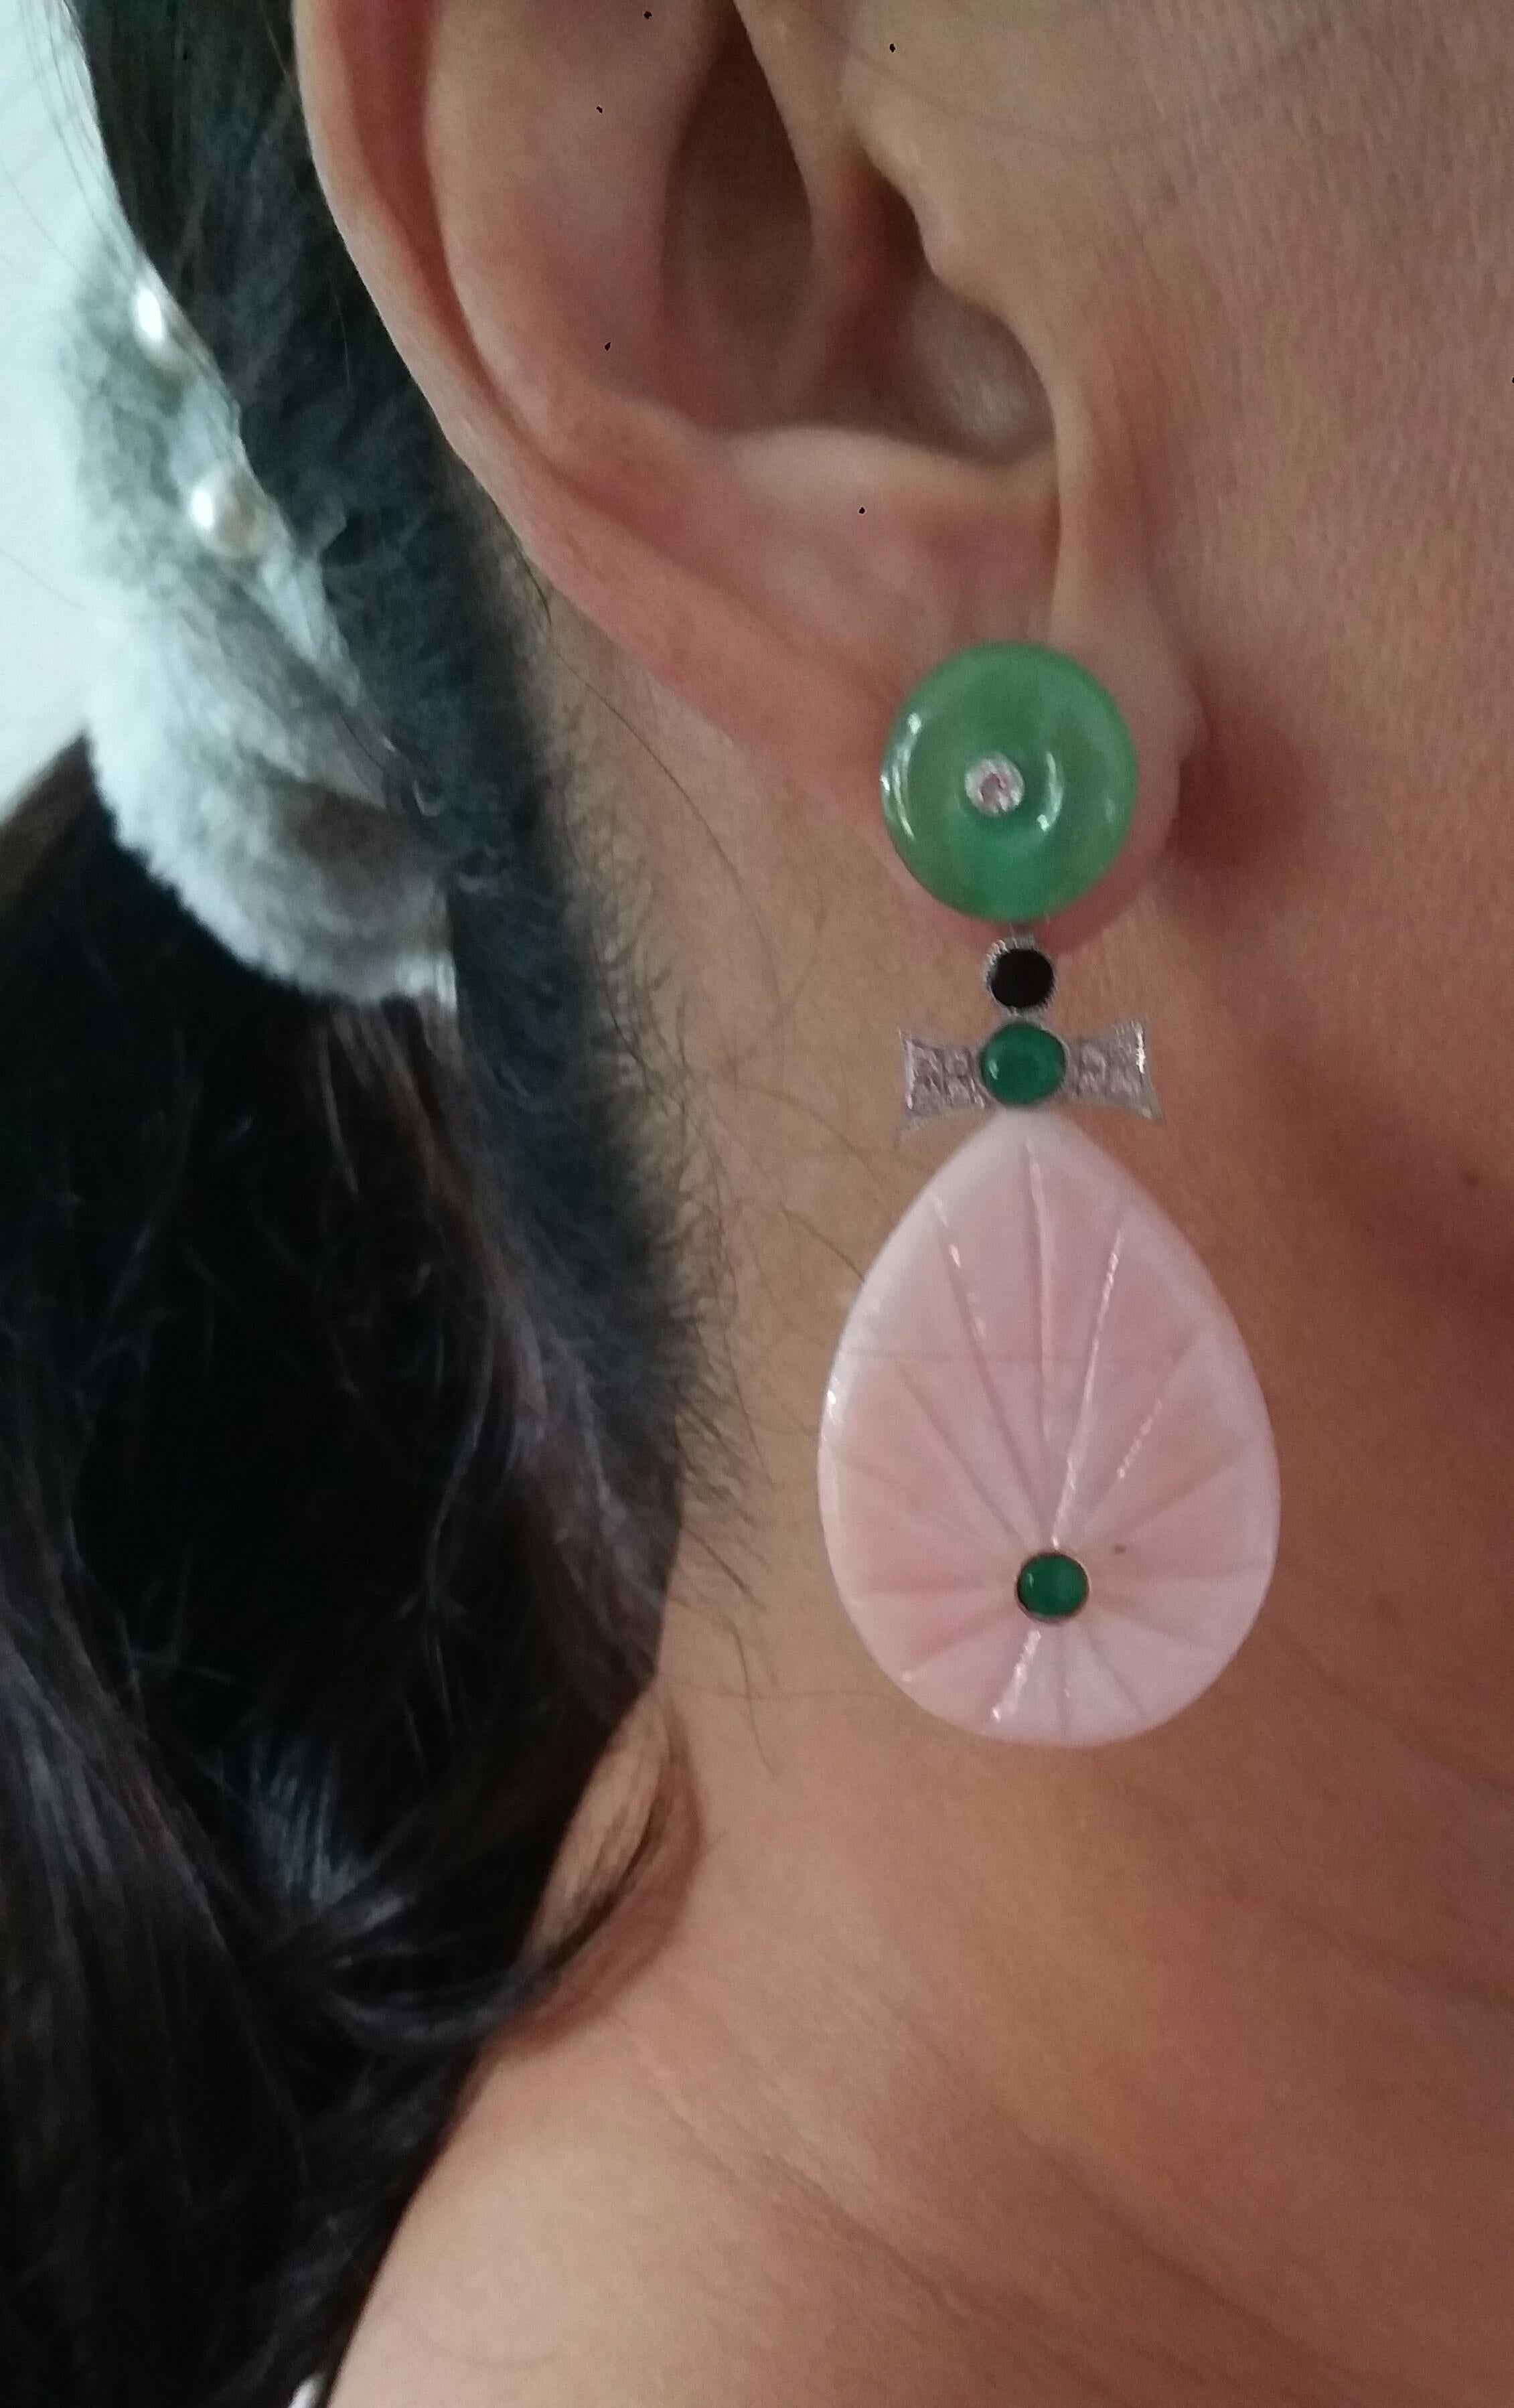 In these classic Art Deco Style earrings we have the tops with 2 Jade discs with small diamonds set in gold in the center ,the middle parts are composed of  2 elements in White Gold, Diamonds small round Emerald cabs and Black Enamel,while in the